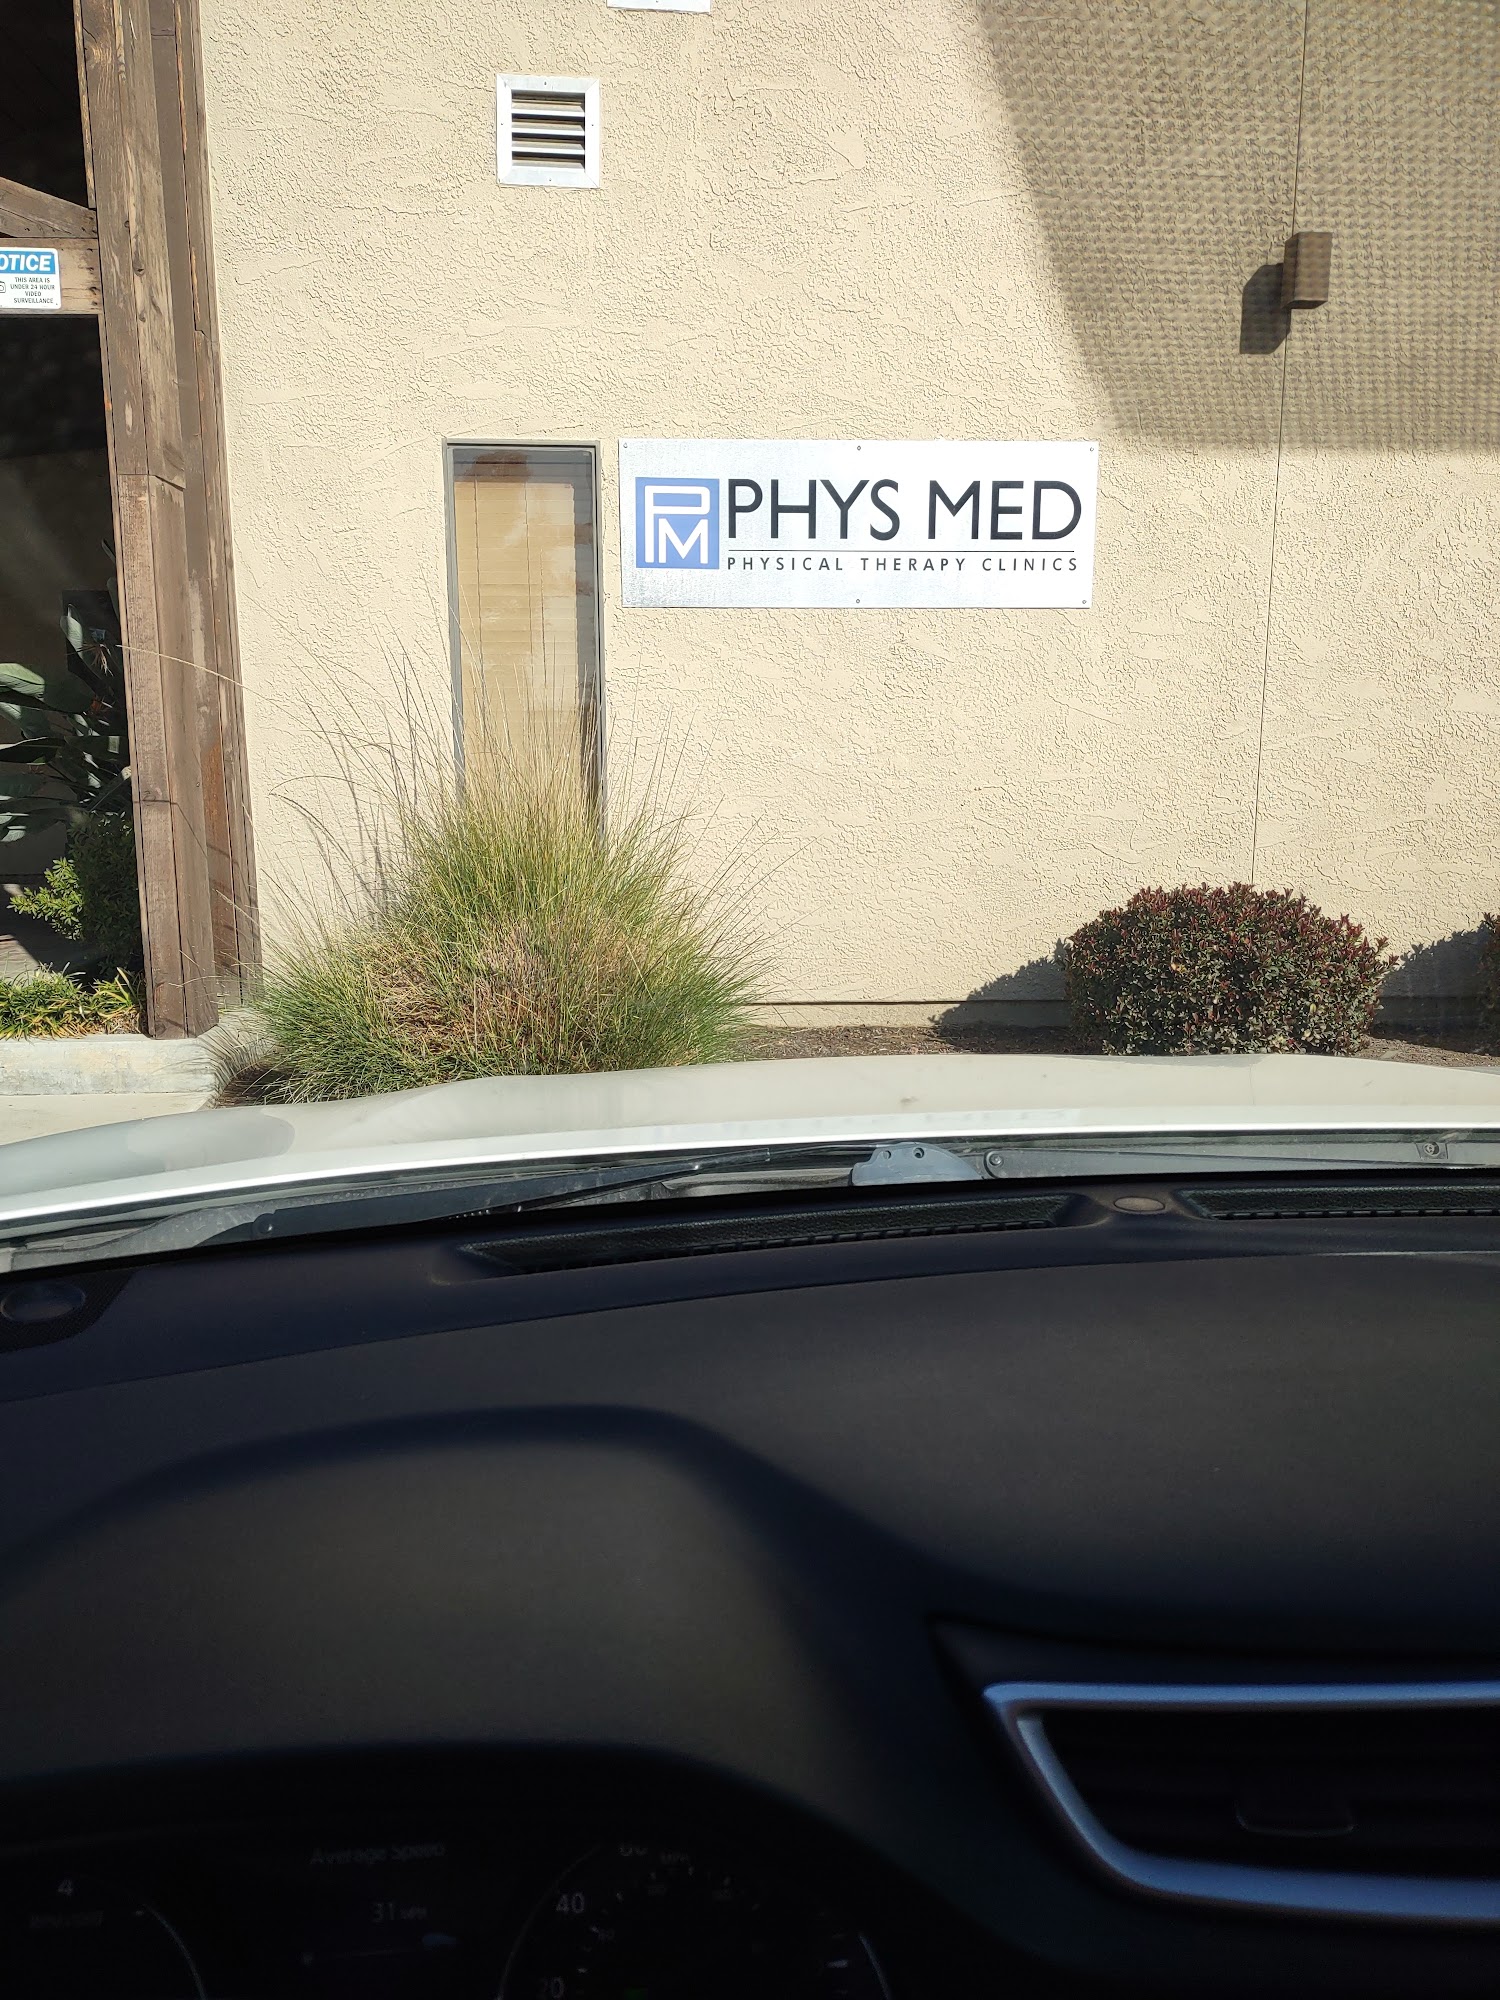 PhysMed - Physical Therapy